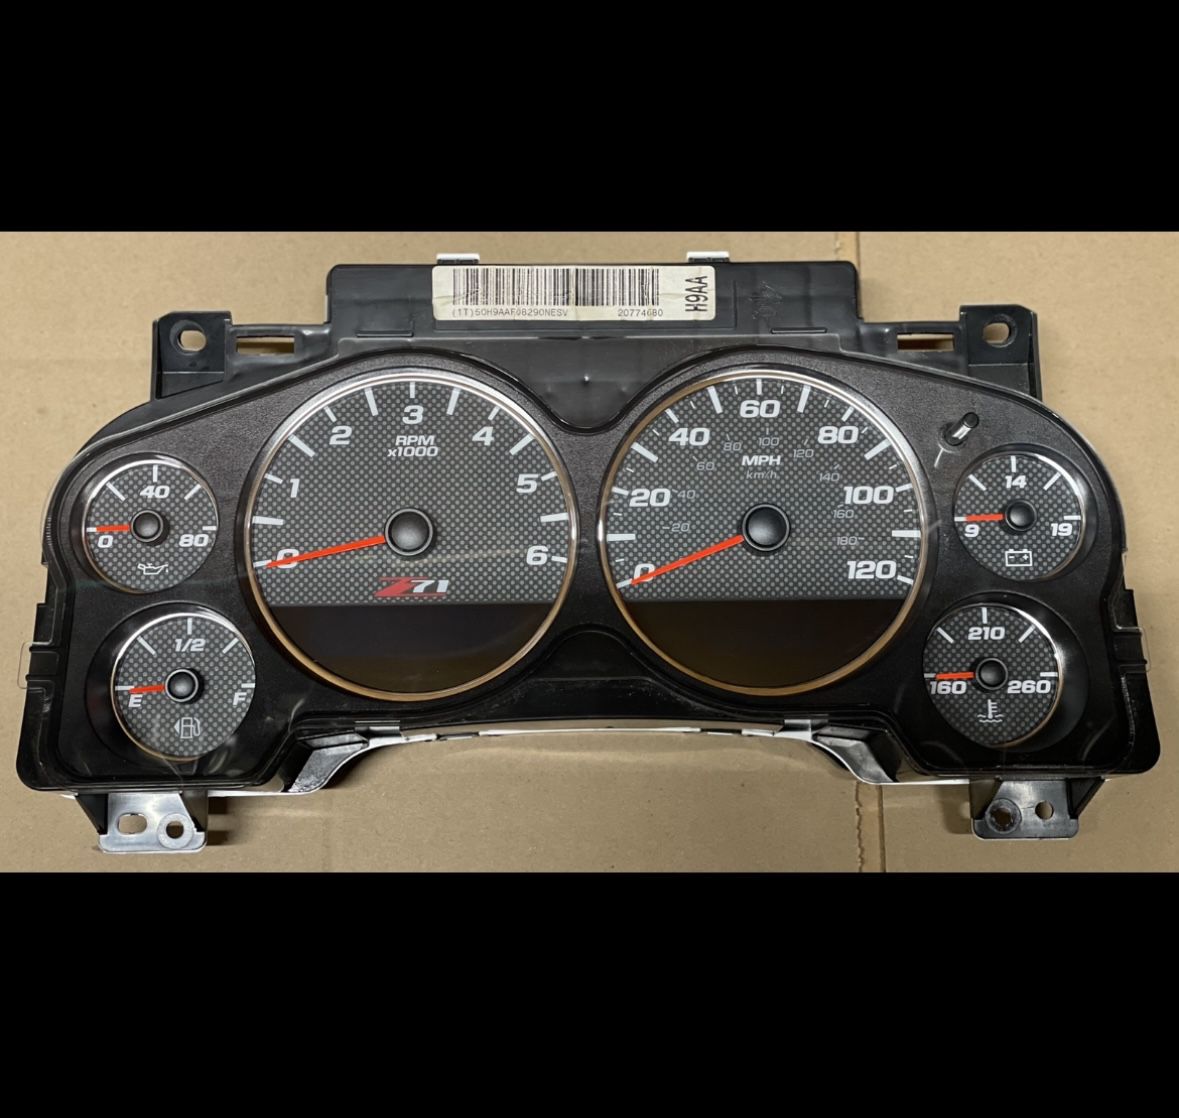 Chevy/GMC Cluster 